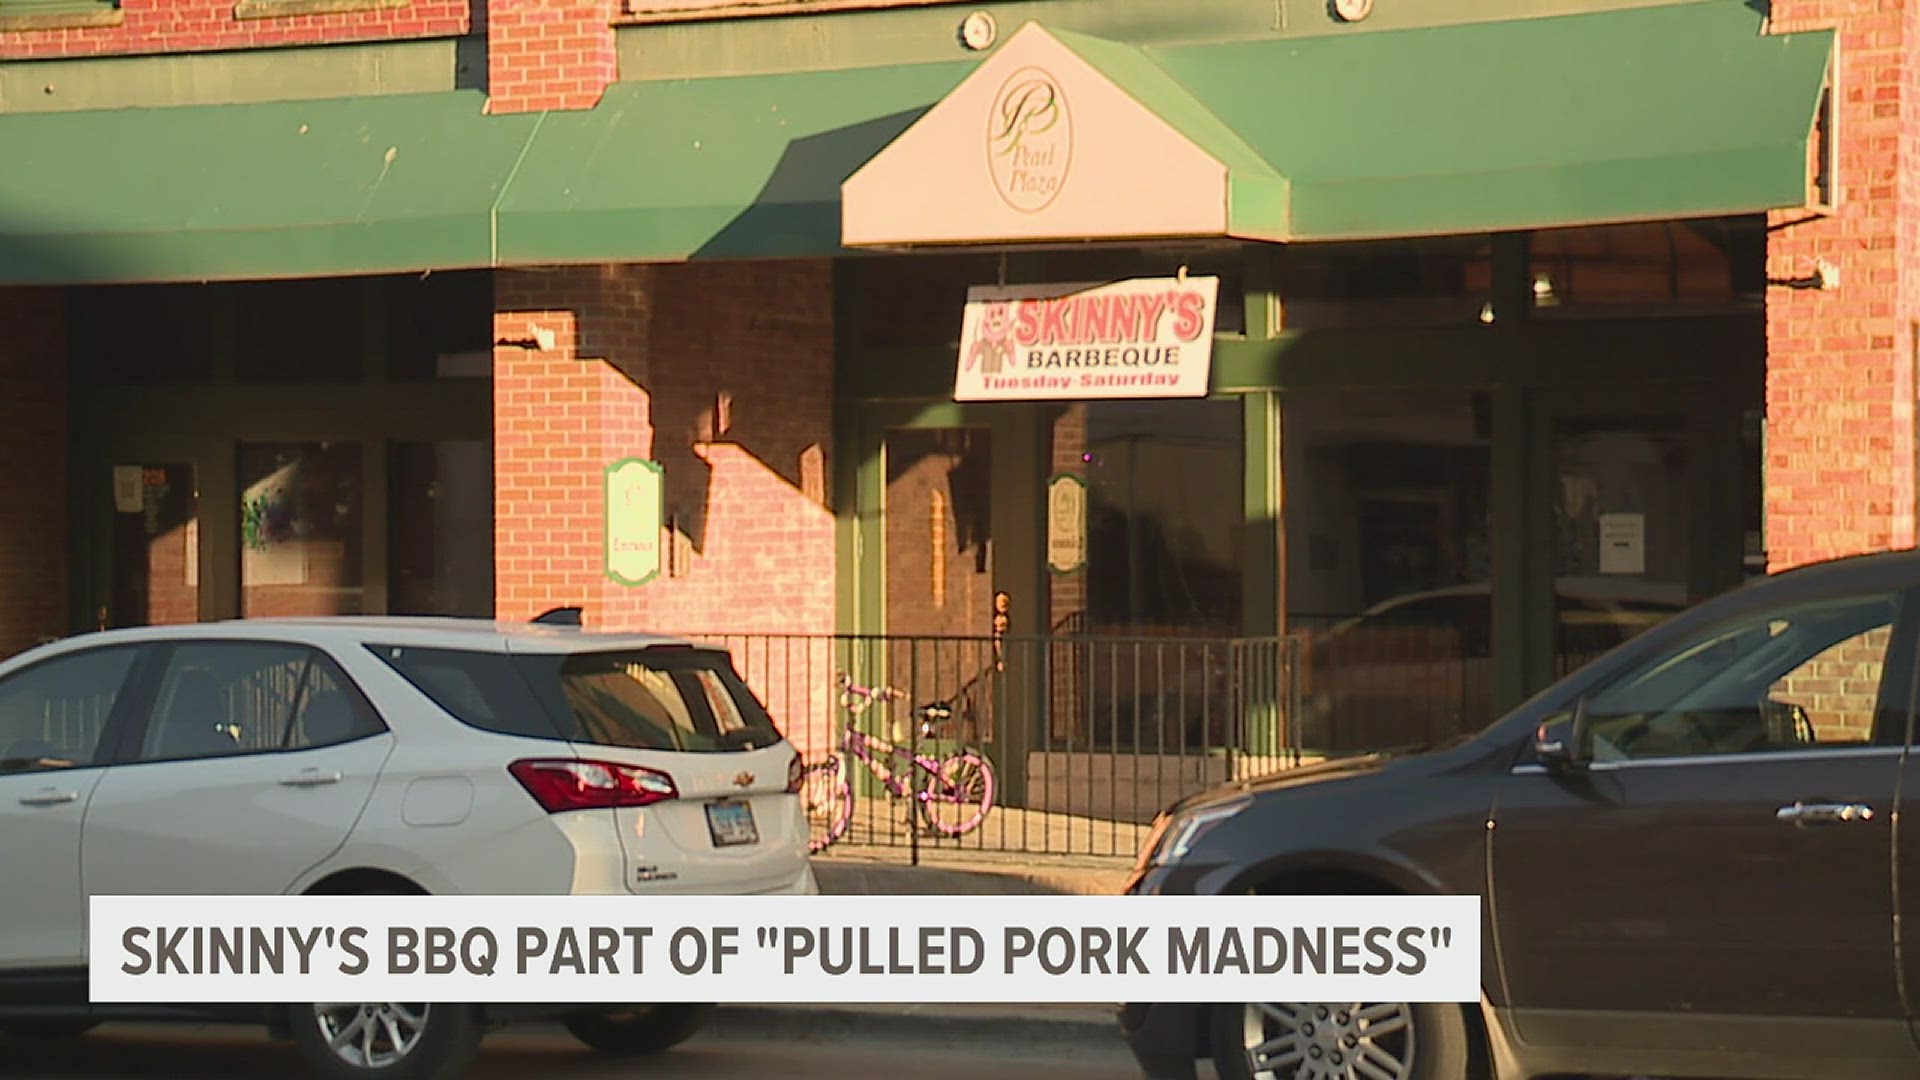 The restaurant has made it to the quarterfinal round of the Iowa Pork Producer's Association's March Madness competition.